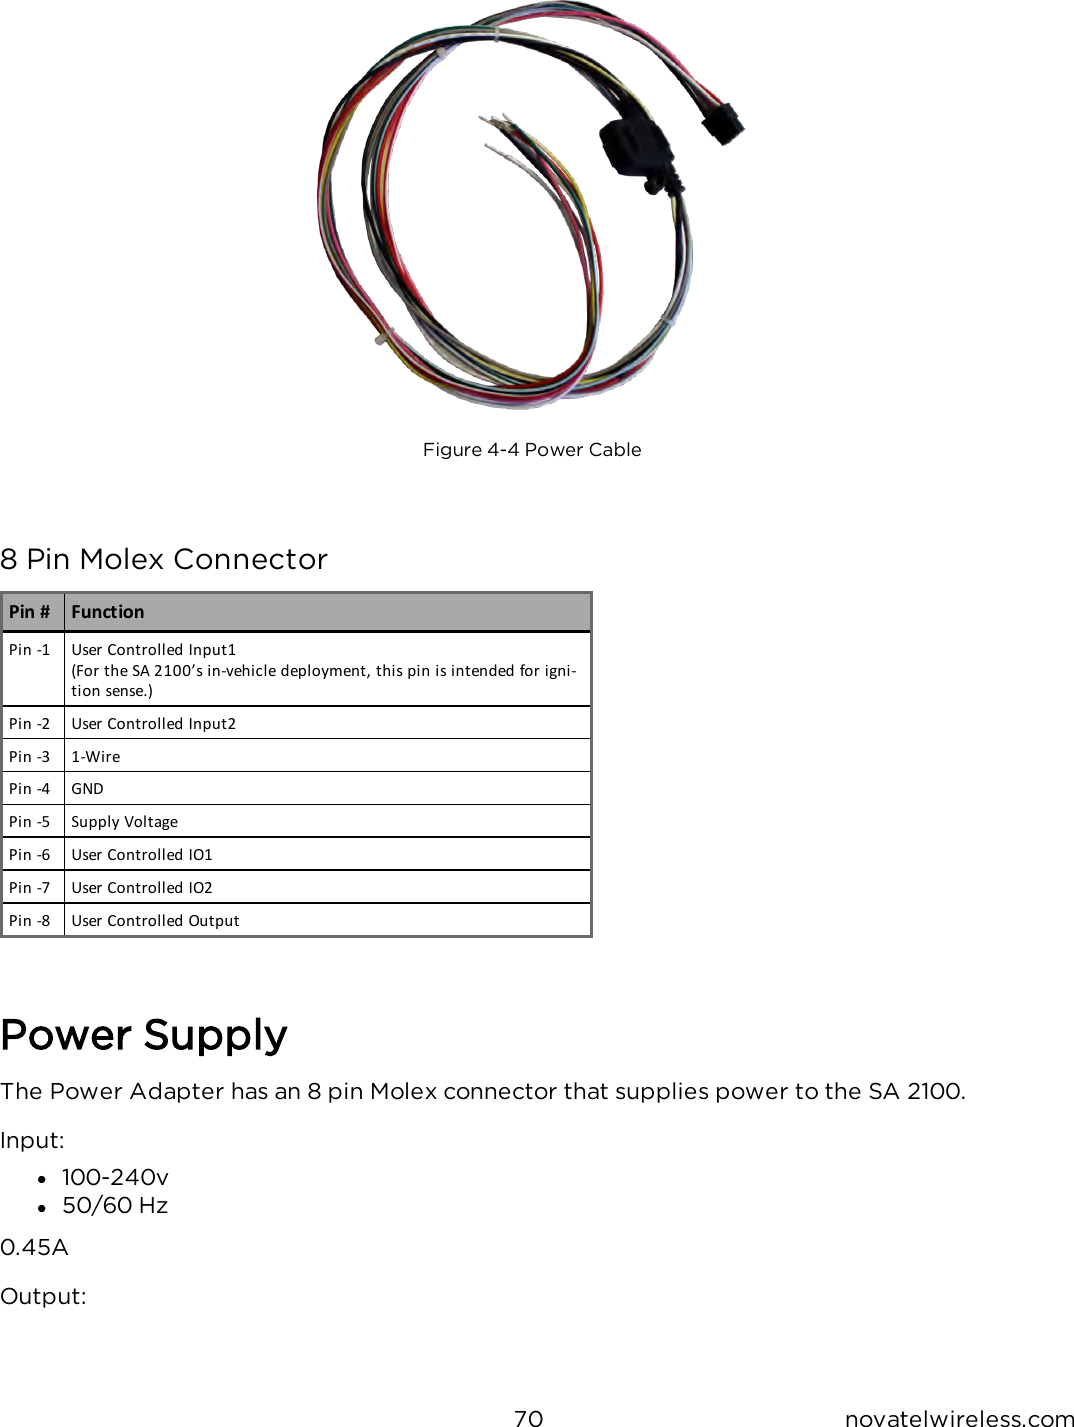 70 novatelwireless.comFigure 4-4 Power Cable8 Pin Molex ConnectorPin # FunctionPin -1 User Controlled Input1(For the SA 2100’s in-vehicle deployment, this pin is intended for igni-tion sense.)Pin -2 User Controlled Input2Pin -3 1-WirePin -4 GNDPin -5 Supply VoltagePin -6 User Controlled IO1Pin -7 User Controlled IO2Pin -8 User Controlled OutputPower SupplyThe Power Adapter has an 8 pin Molex connector that supplies power to the SA 2100.Input:l100-240vl50/60 Hz0.45AOutput: